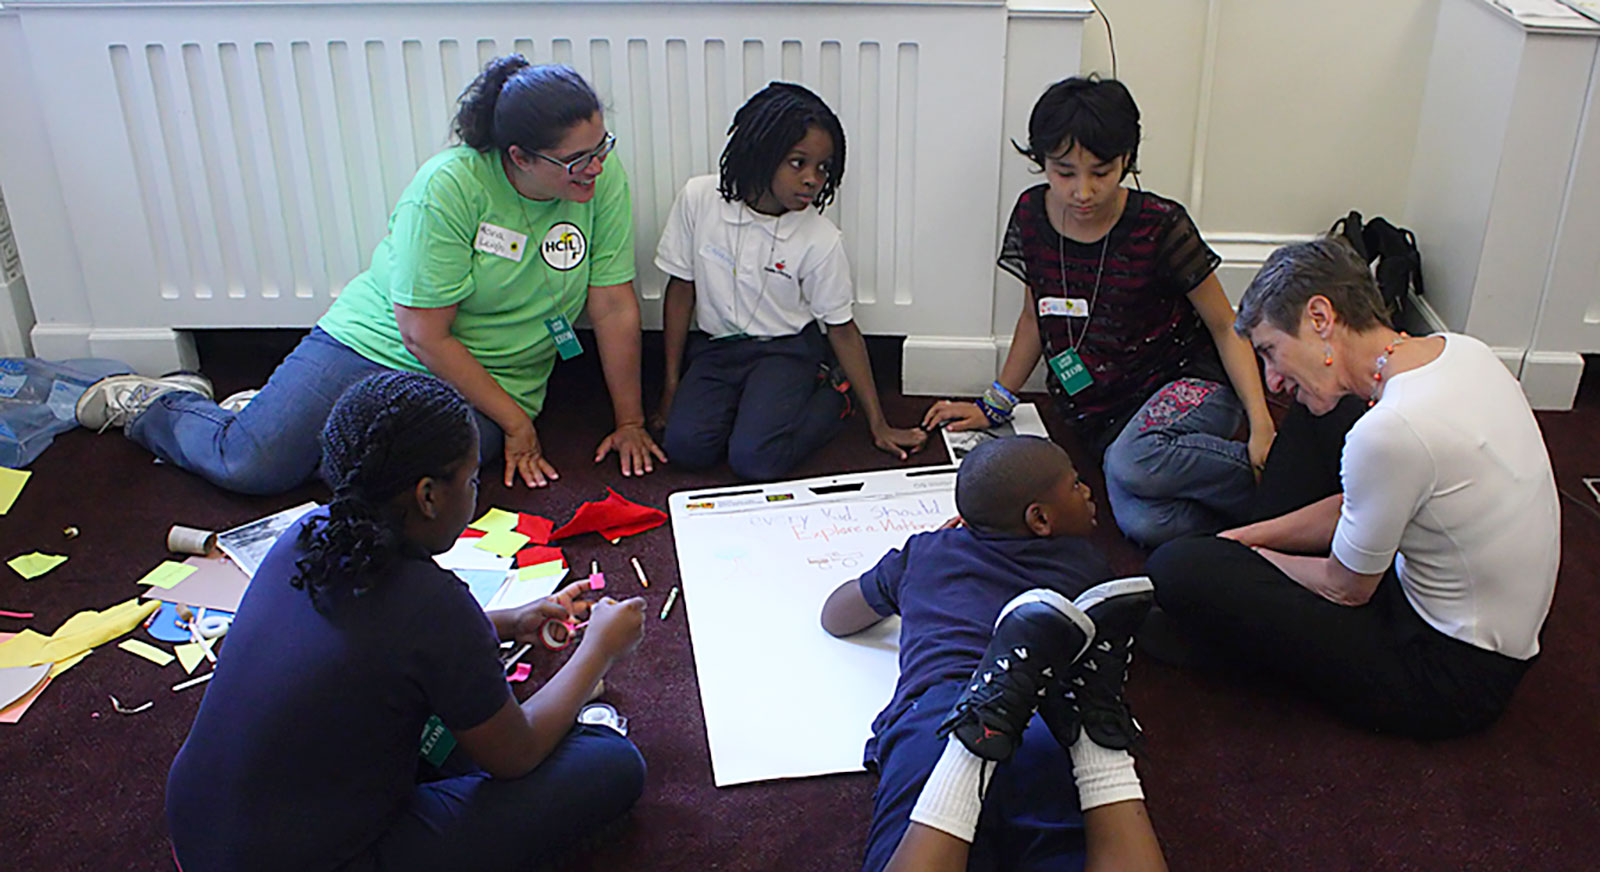 Children and adults sit around a large piece of paper while co-designing the Every Kid in a Park website.